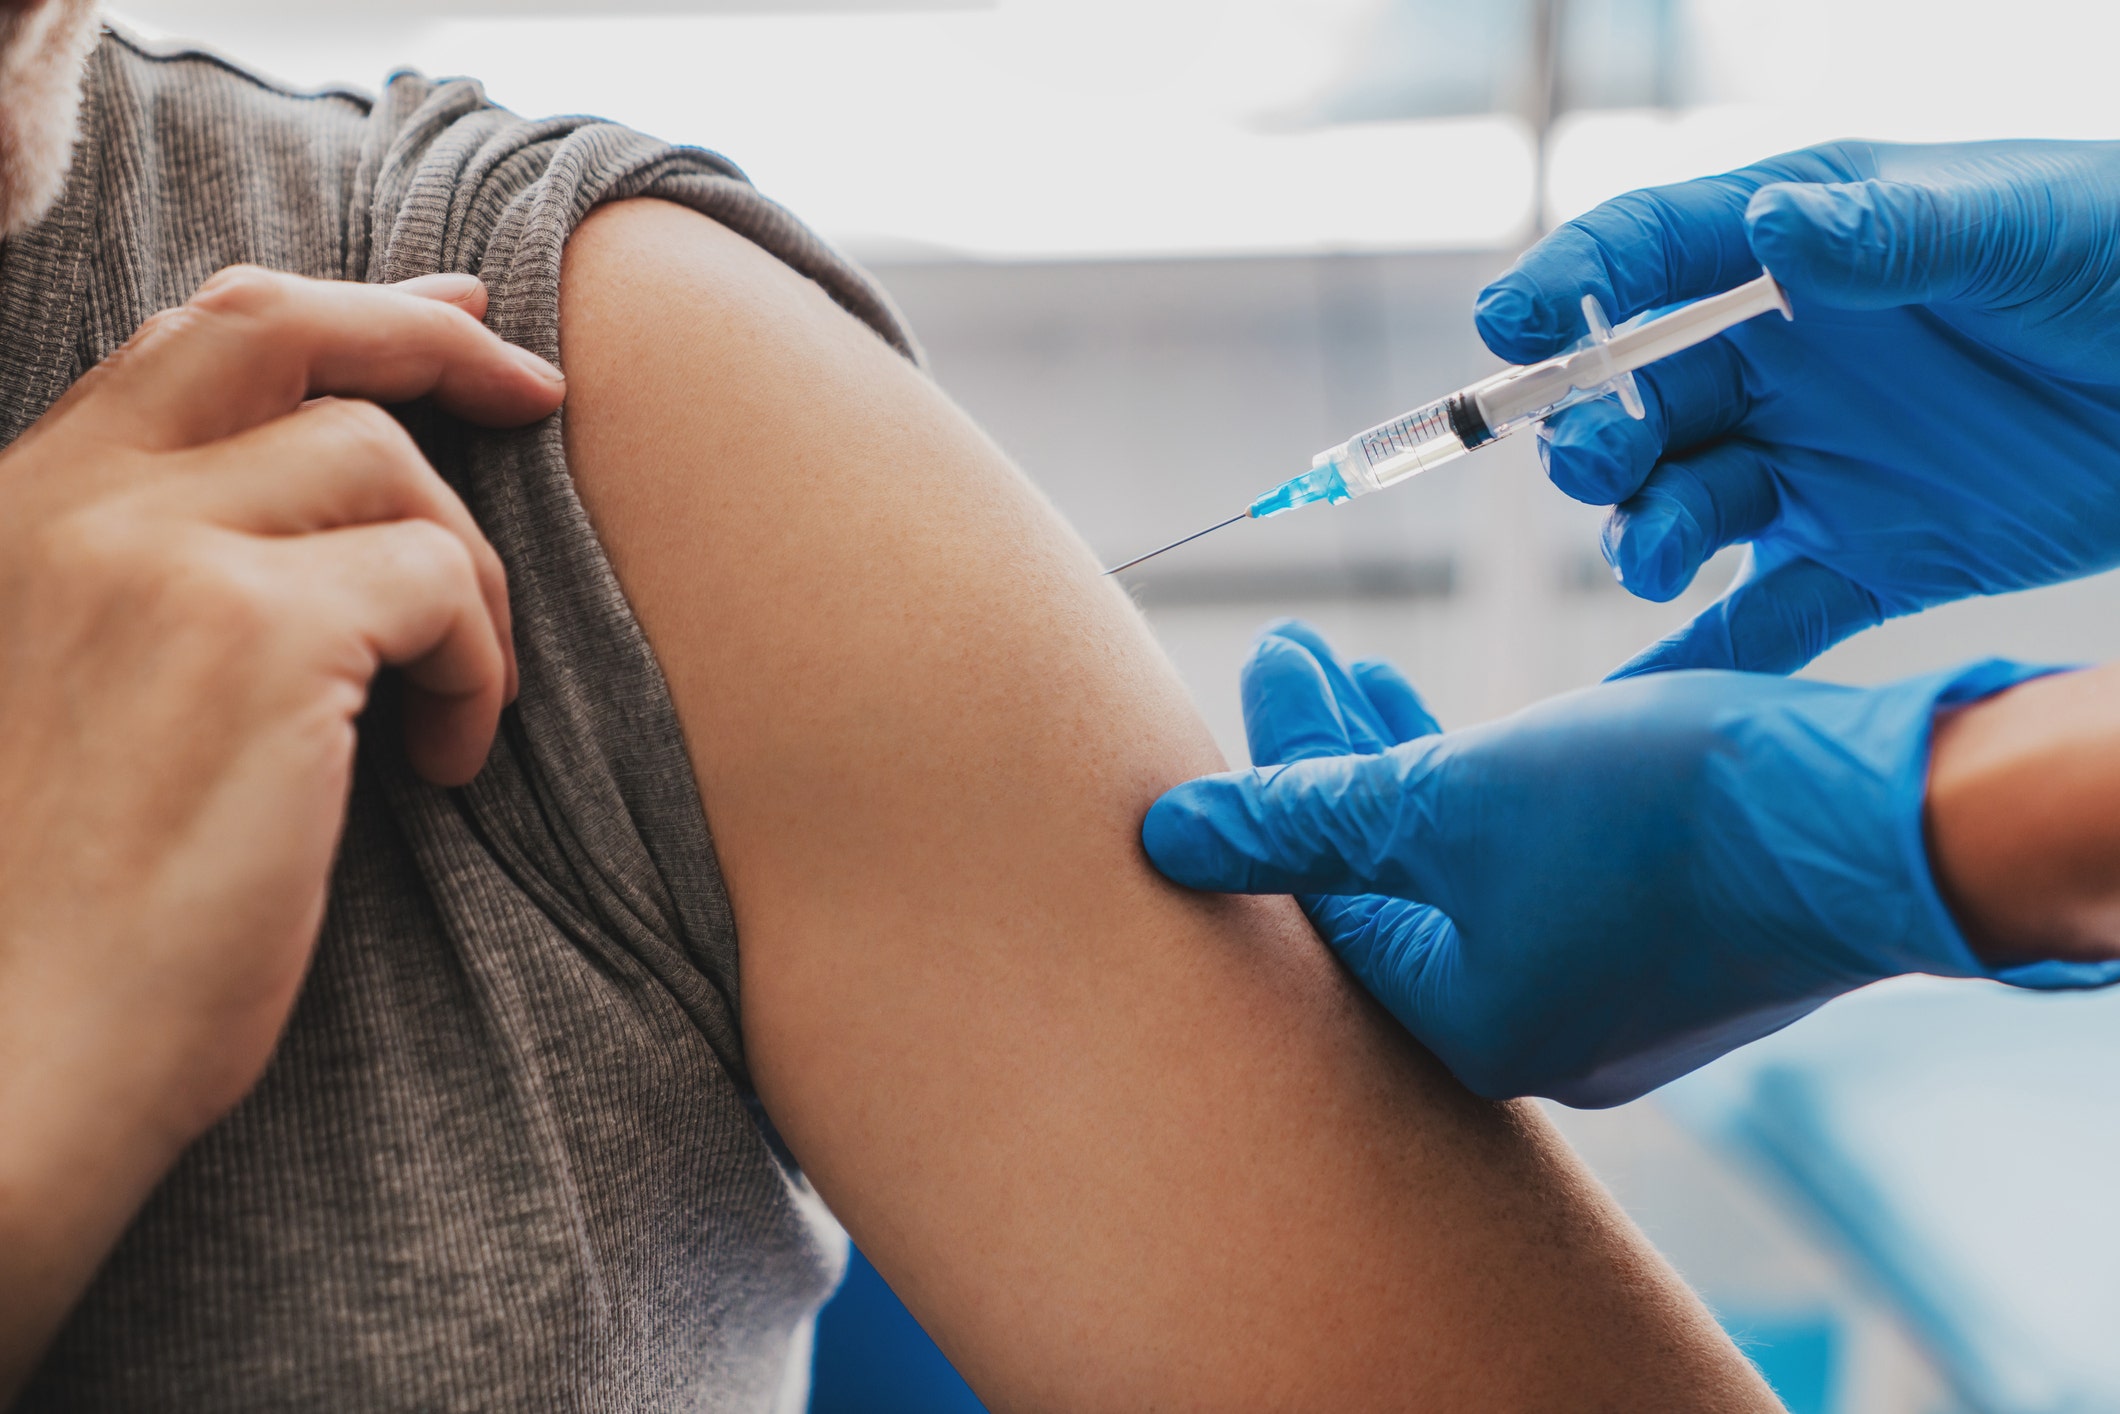 US providers ought to mandate COVID-19 vaccines for personnel, most economists say